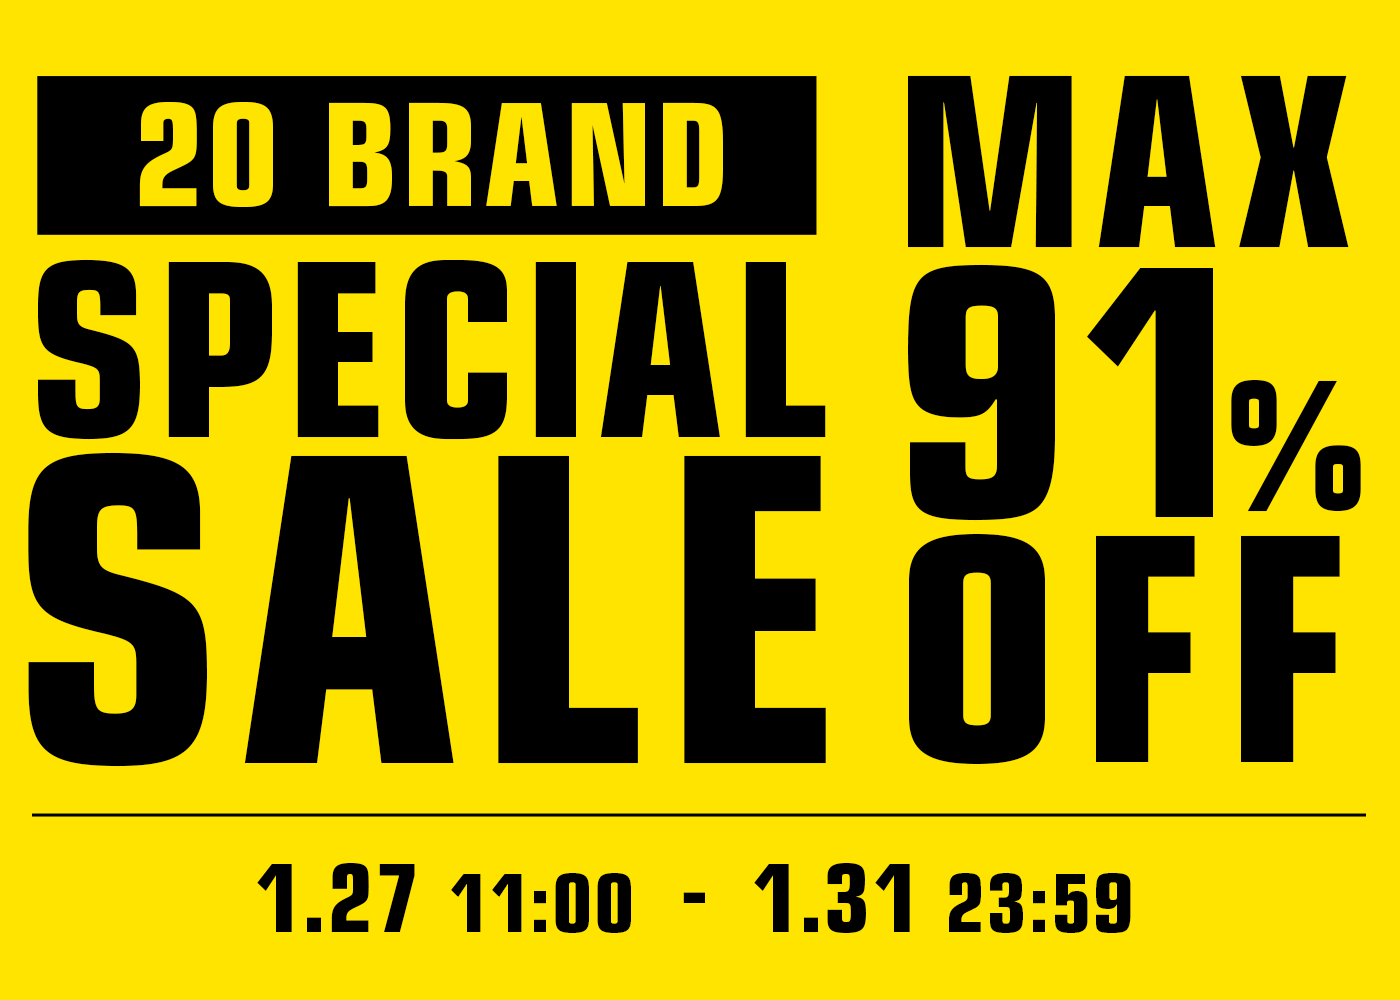 20 BRAND SPECIAL SALE